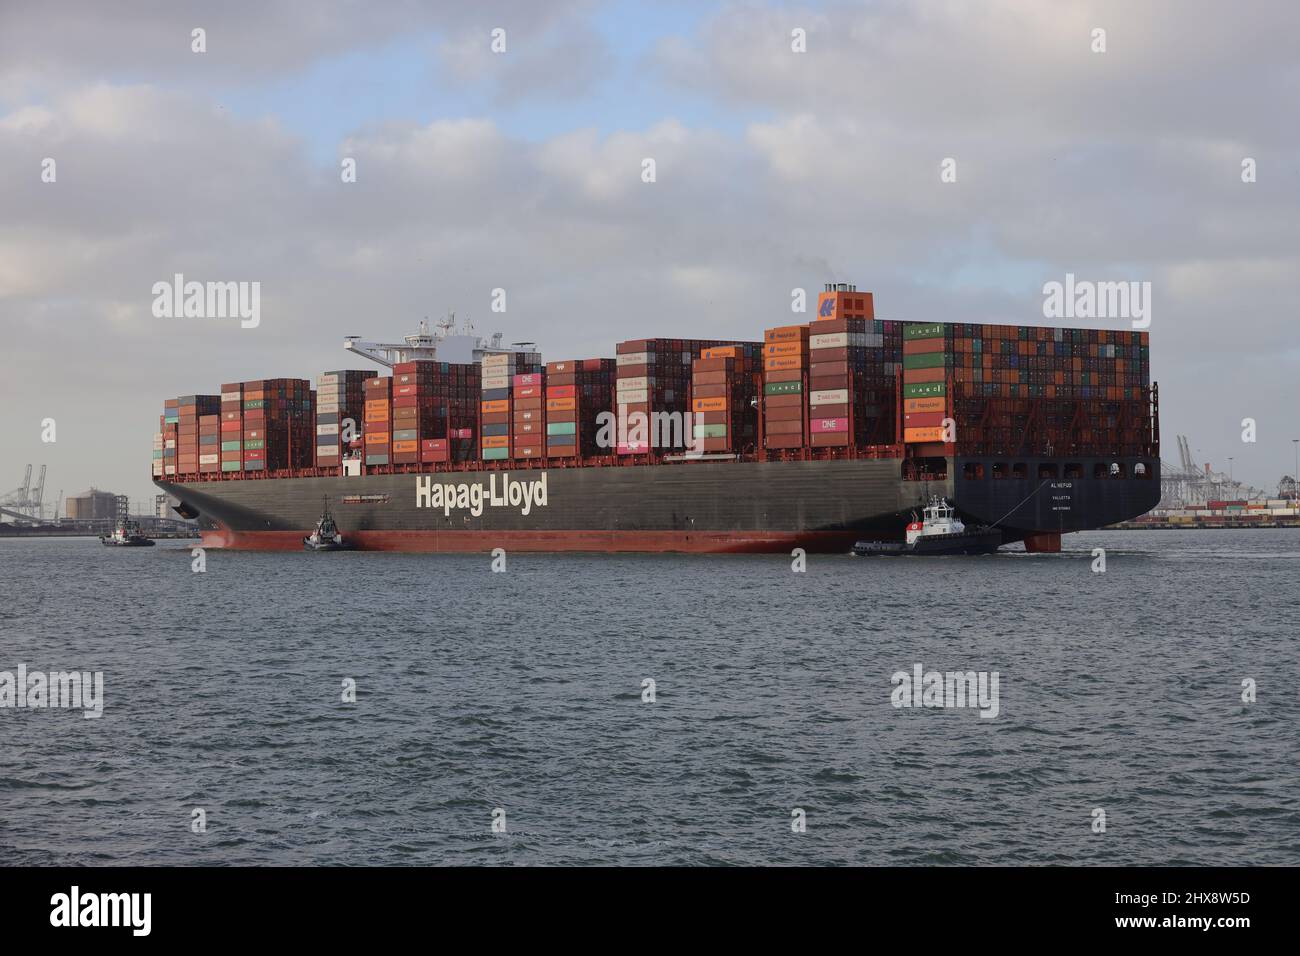 The container ship Al Nefud arrives in the port of Rotterdam on January 30, 2022. Stock Photo